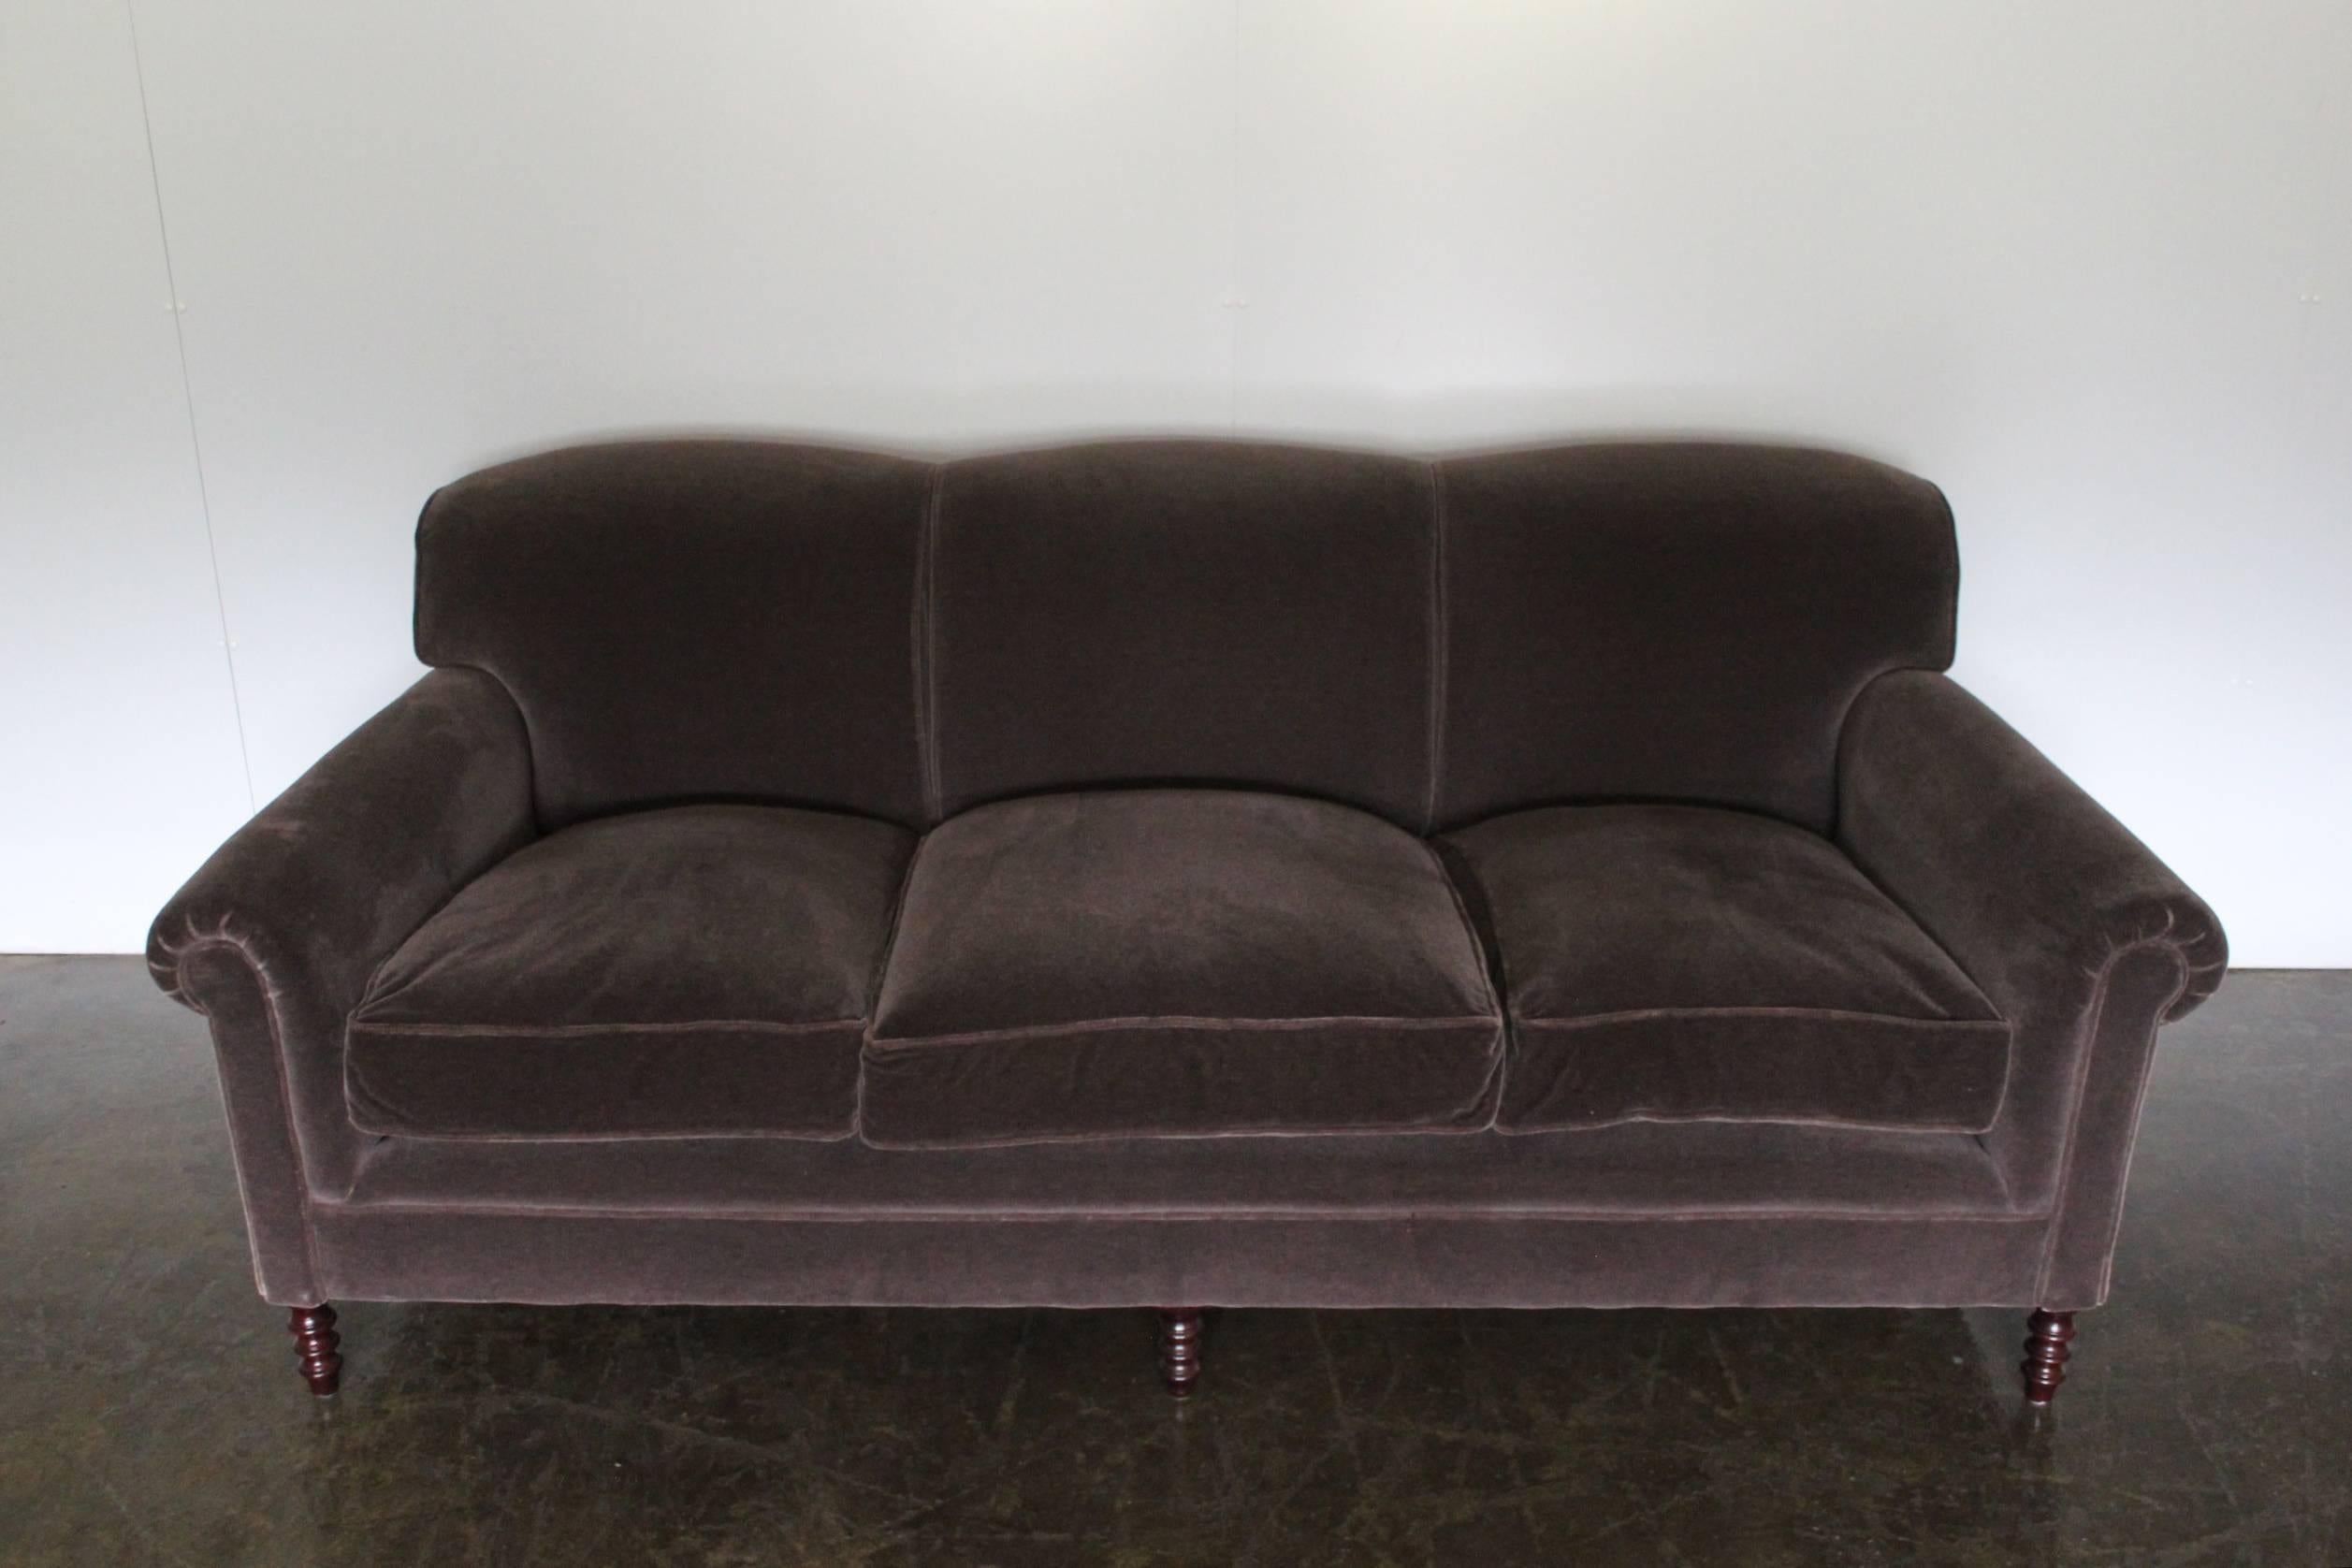 Hand-Crafted Pair of George Smith Signature “Scroll-Arm” Three-Seat Sofas in “Mink” Mohair